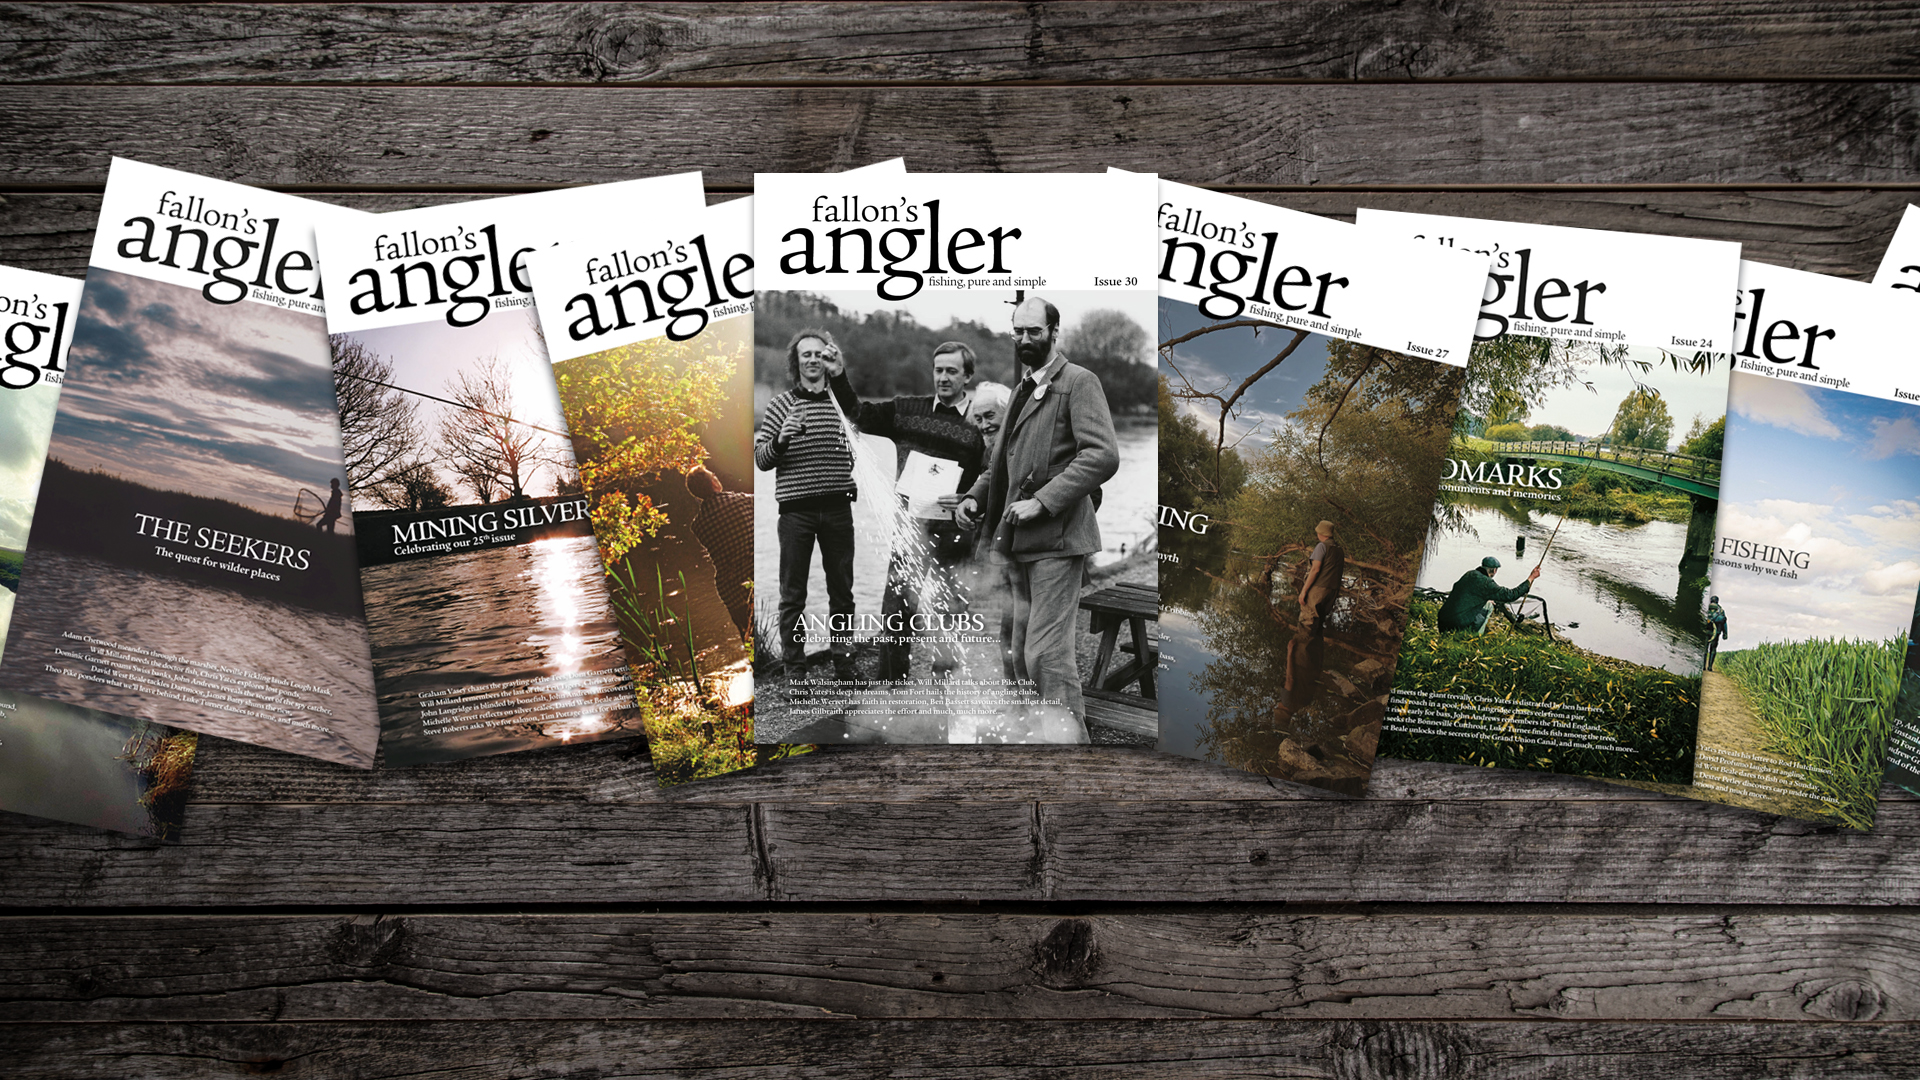 Fallon's Angler also sells back issues on its website